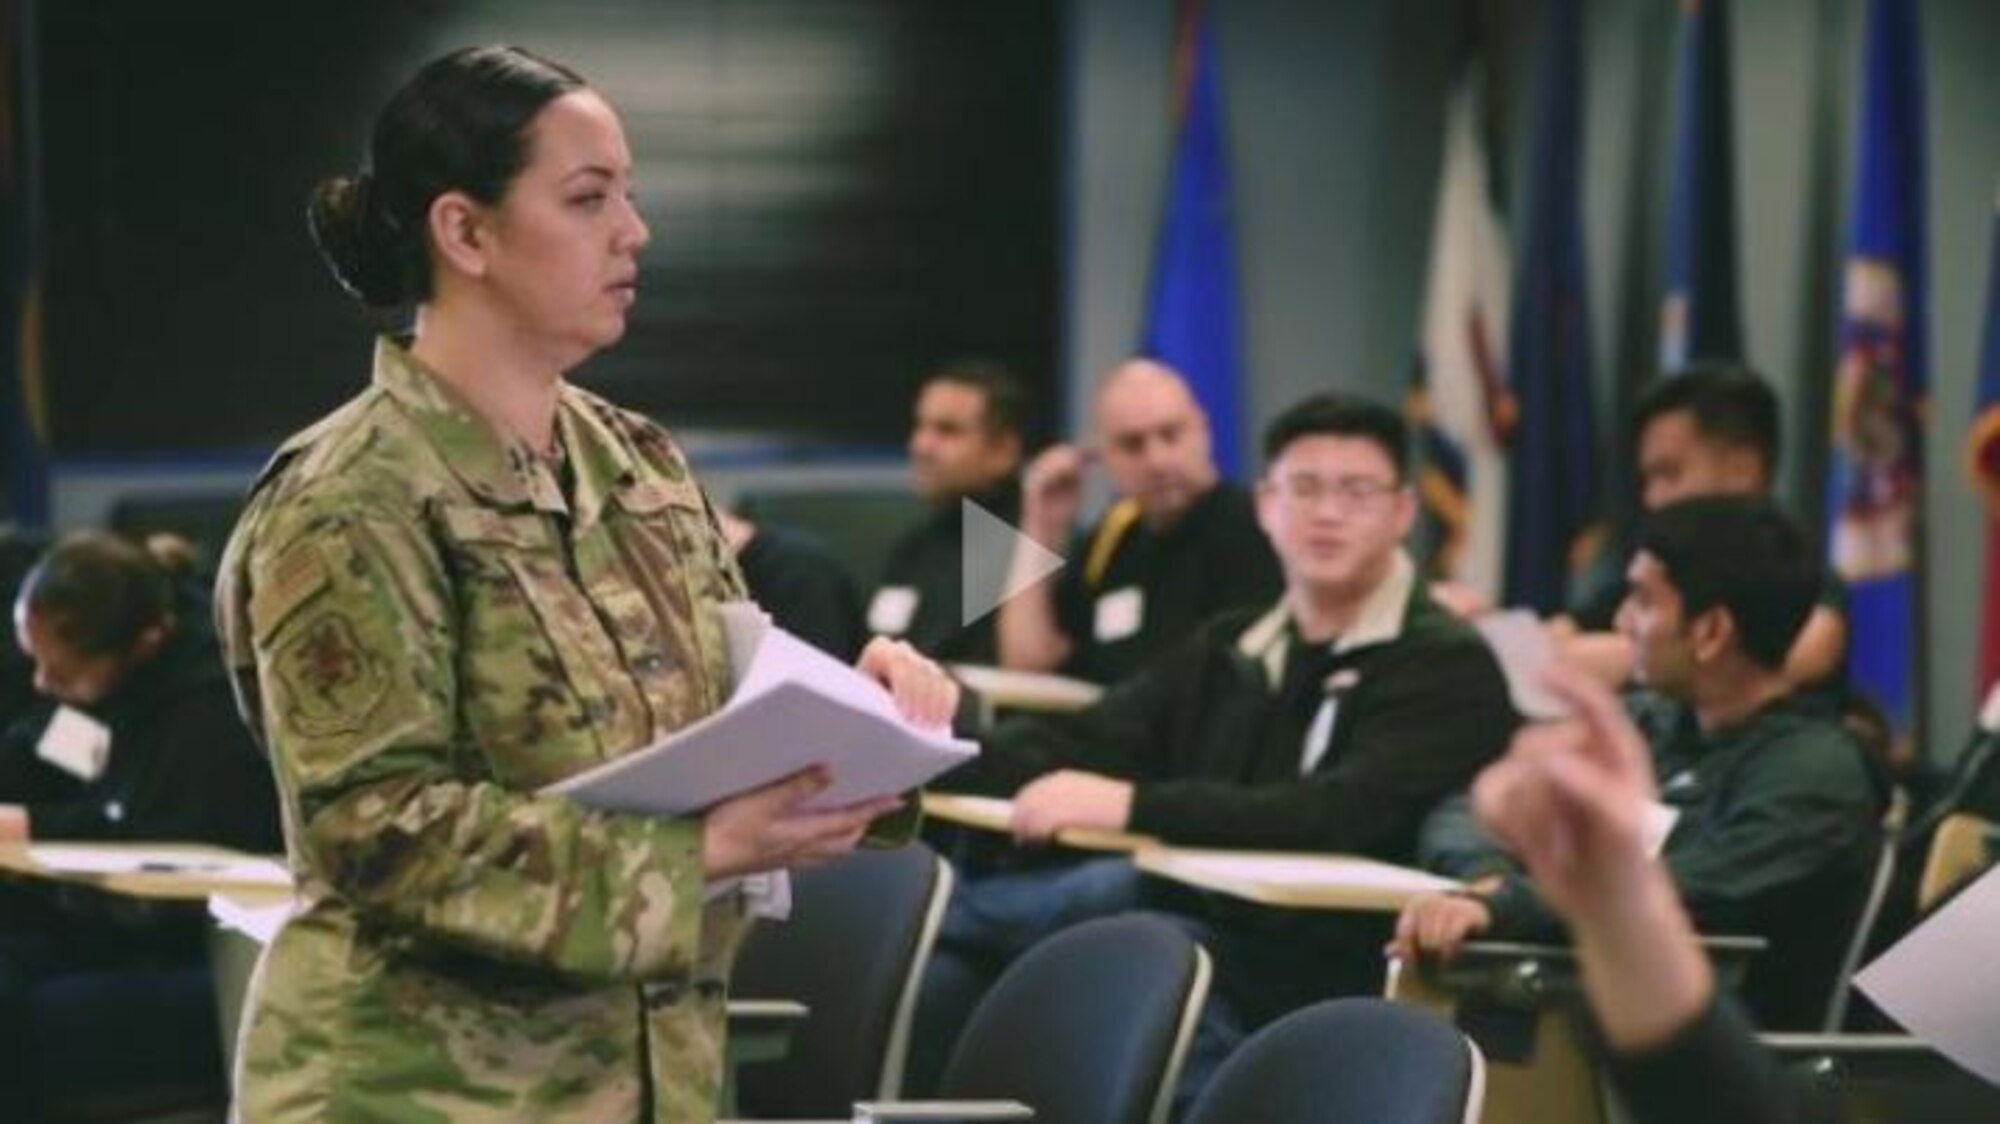 Tech. Sgt. Danielle Eaton, assigned as the 349th Air Mobility Wing Development & Training Flight Chief reflects on how her contributions helped prepare future citizen airmen.